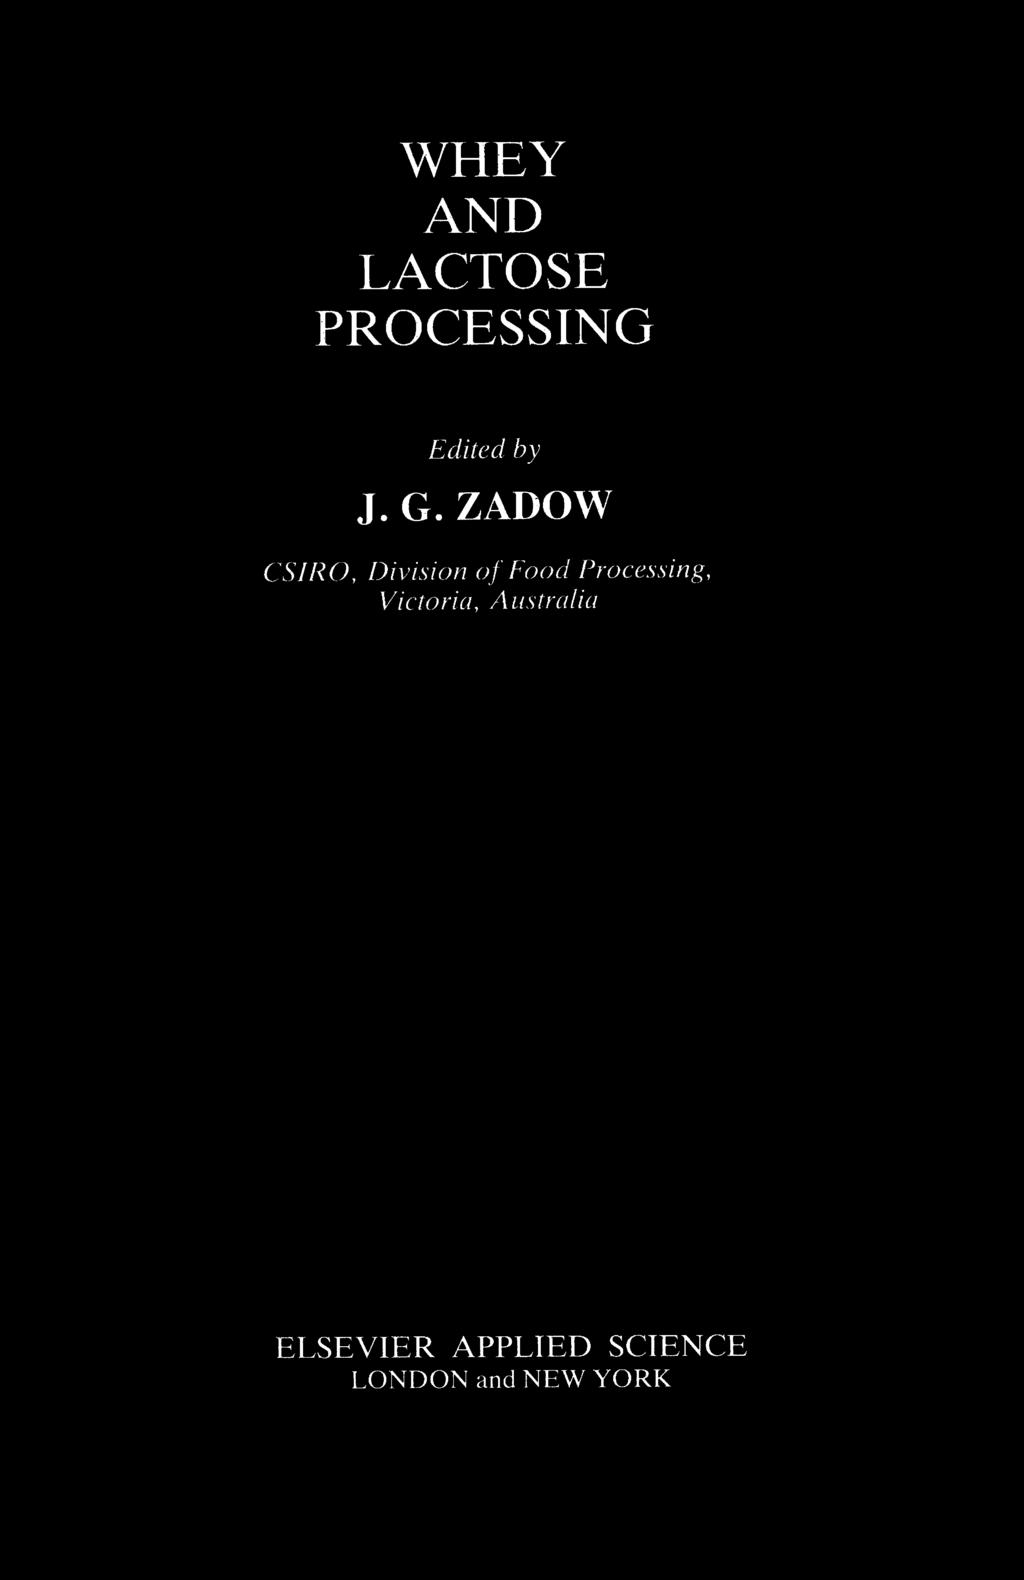 WHEY AND LACTOSE PROCESSING Edited by